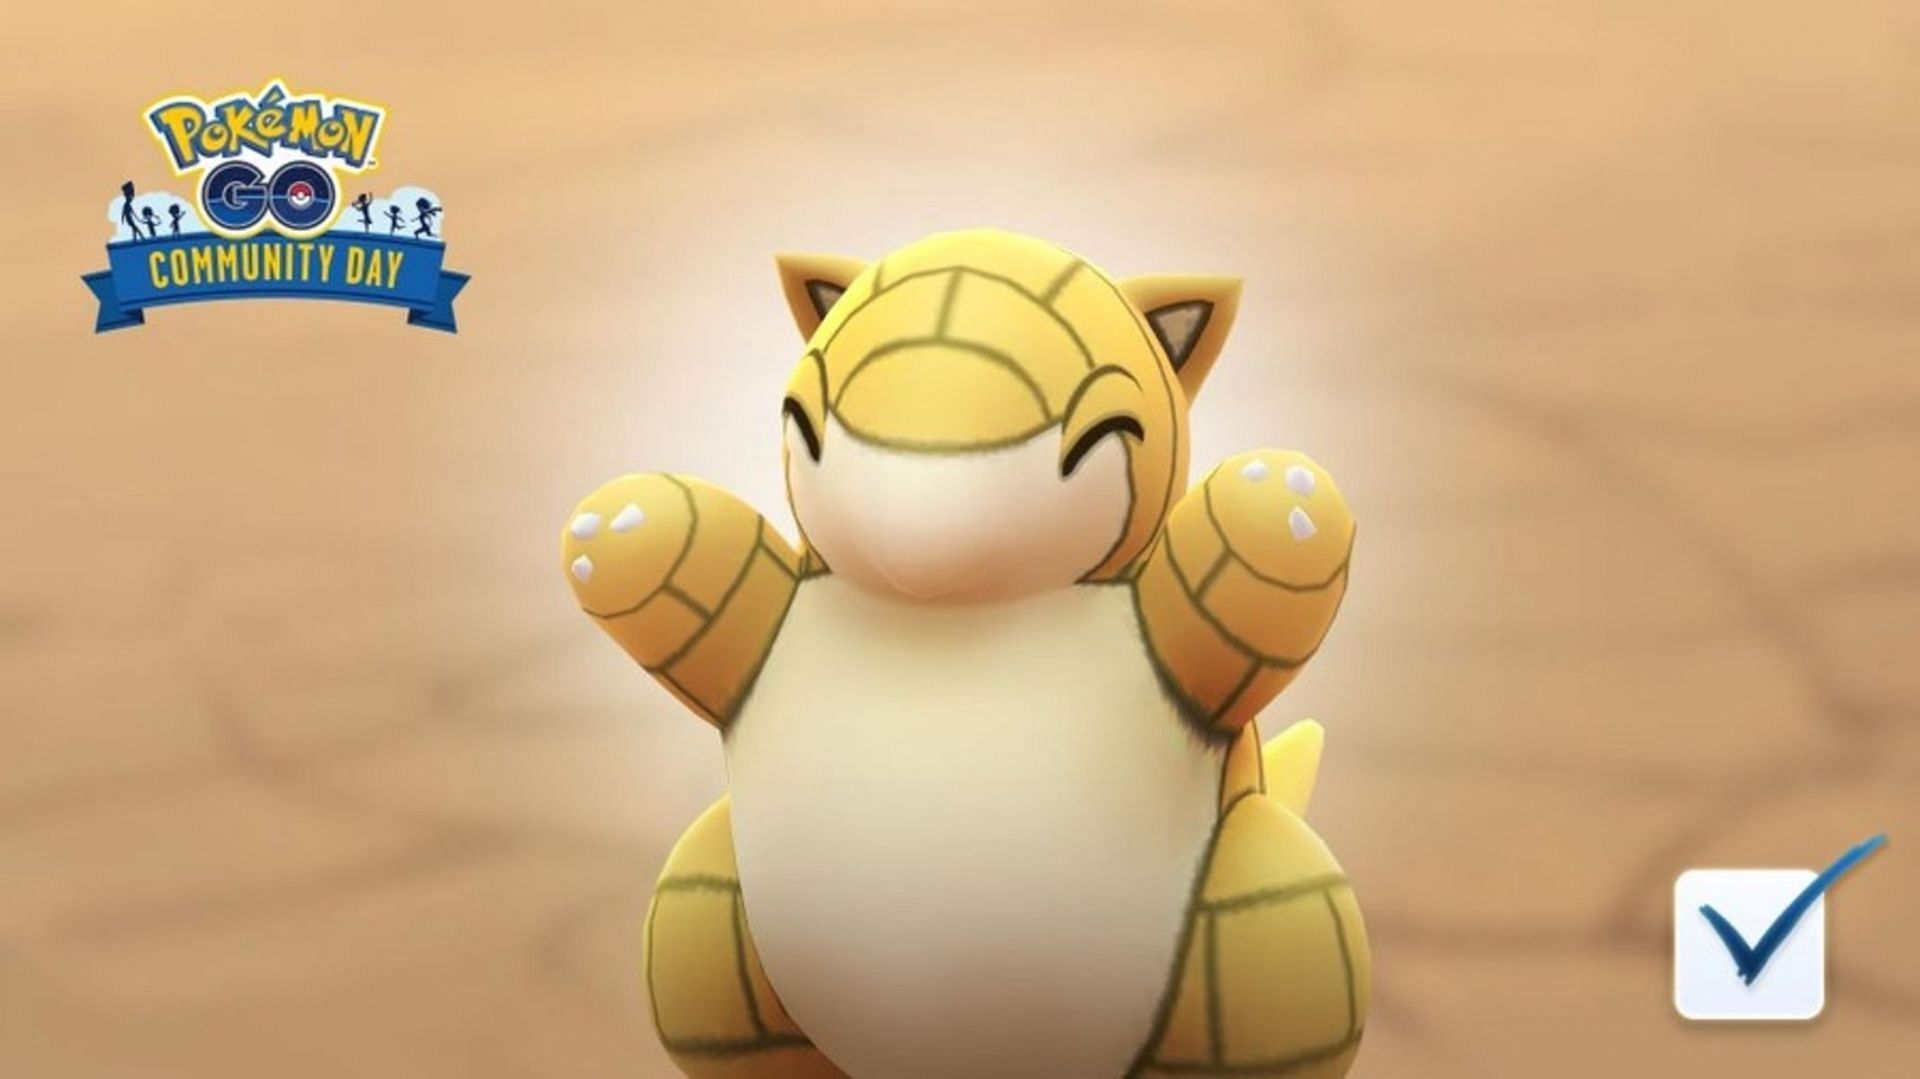 Sandshrew won a fan vote via the official Pokemon site to become the Community Day choice for March 2022 (Image via Niantic)